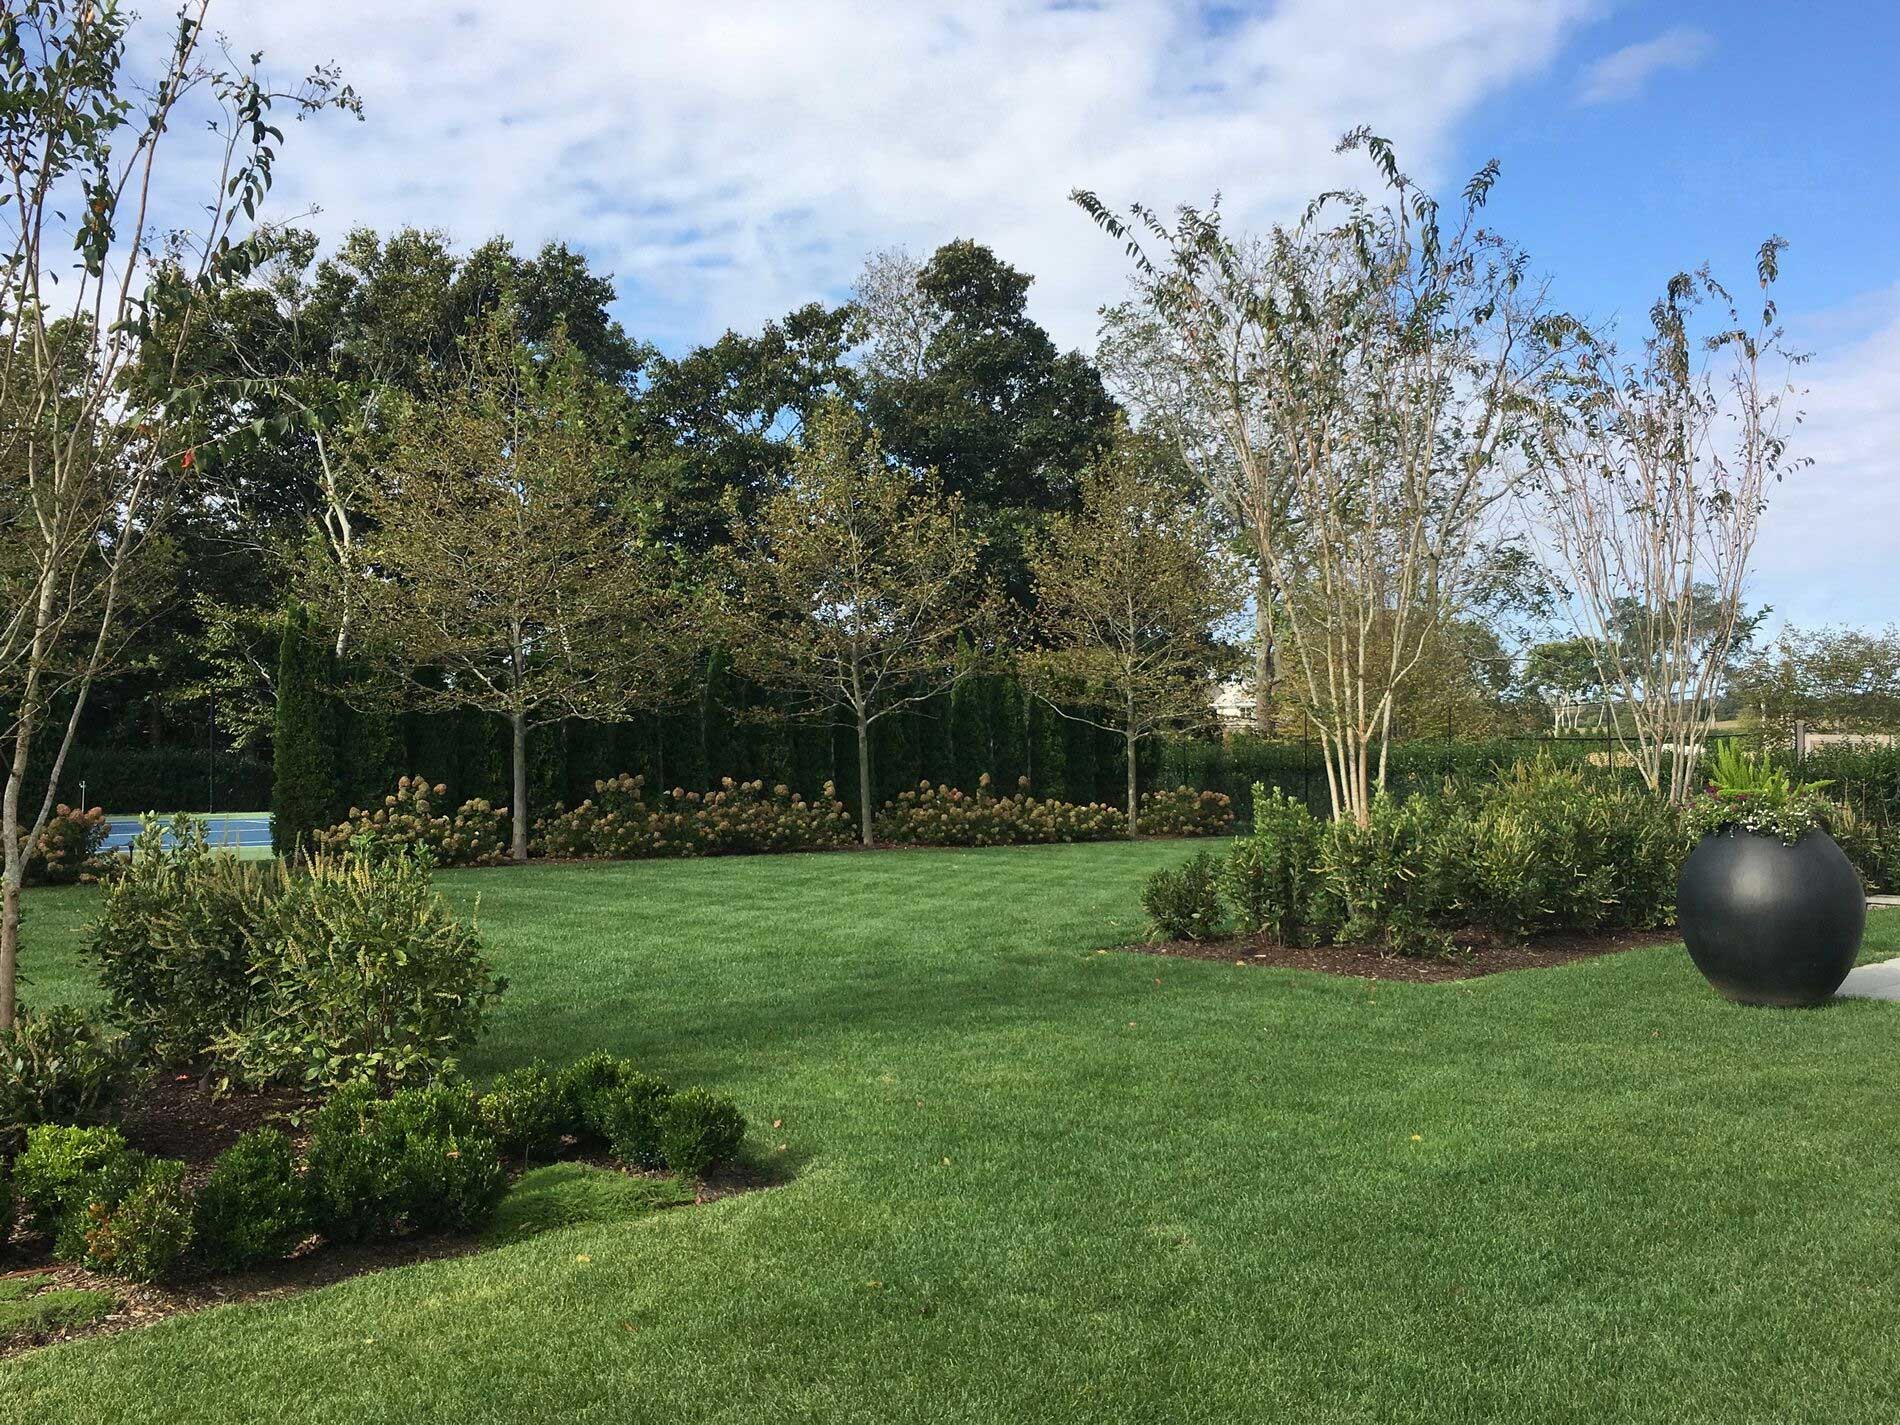 Passing through the row of Crapemyrtle leads to another lawn beyond which the tennis court is screened with a layered planting.